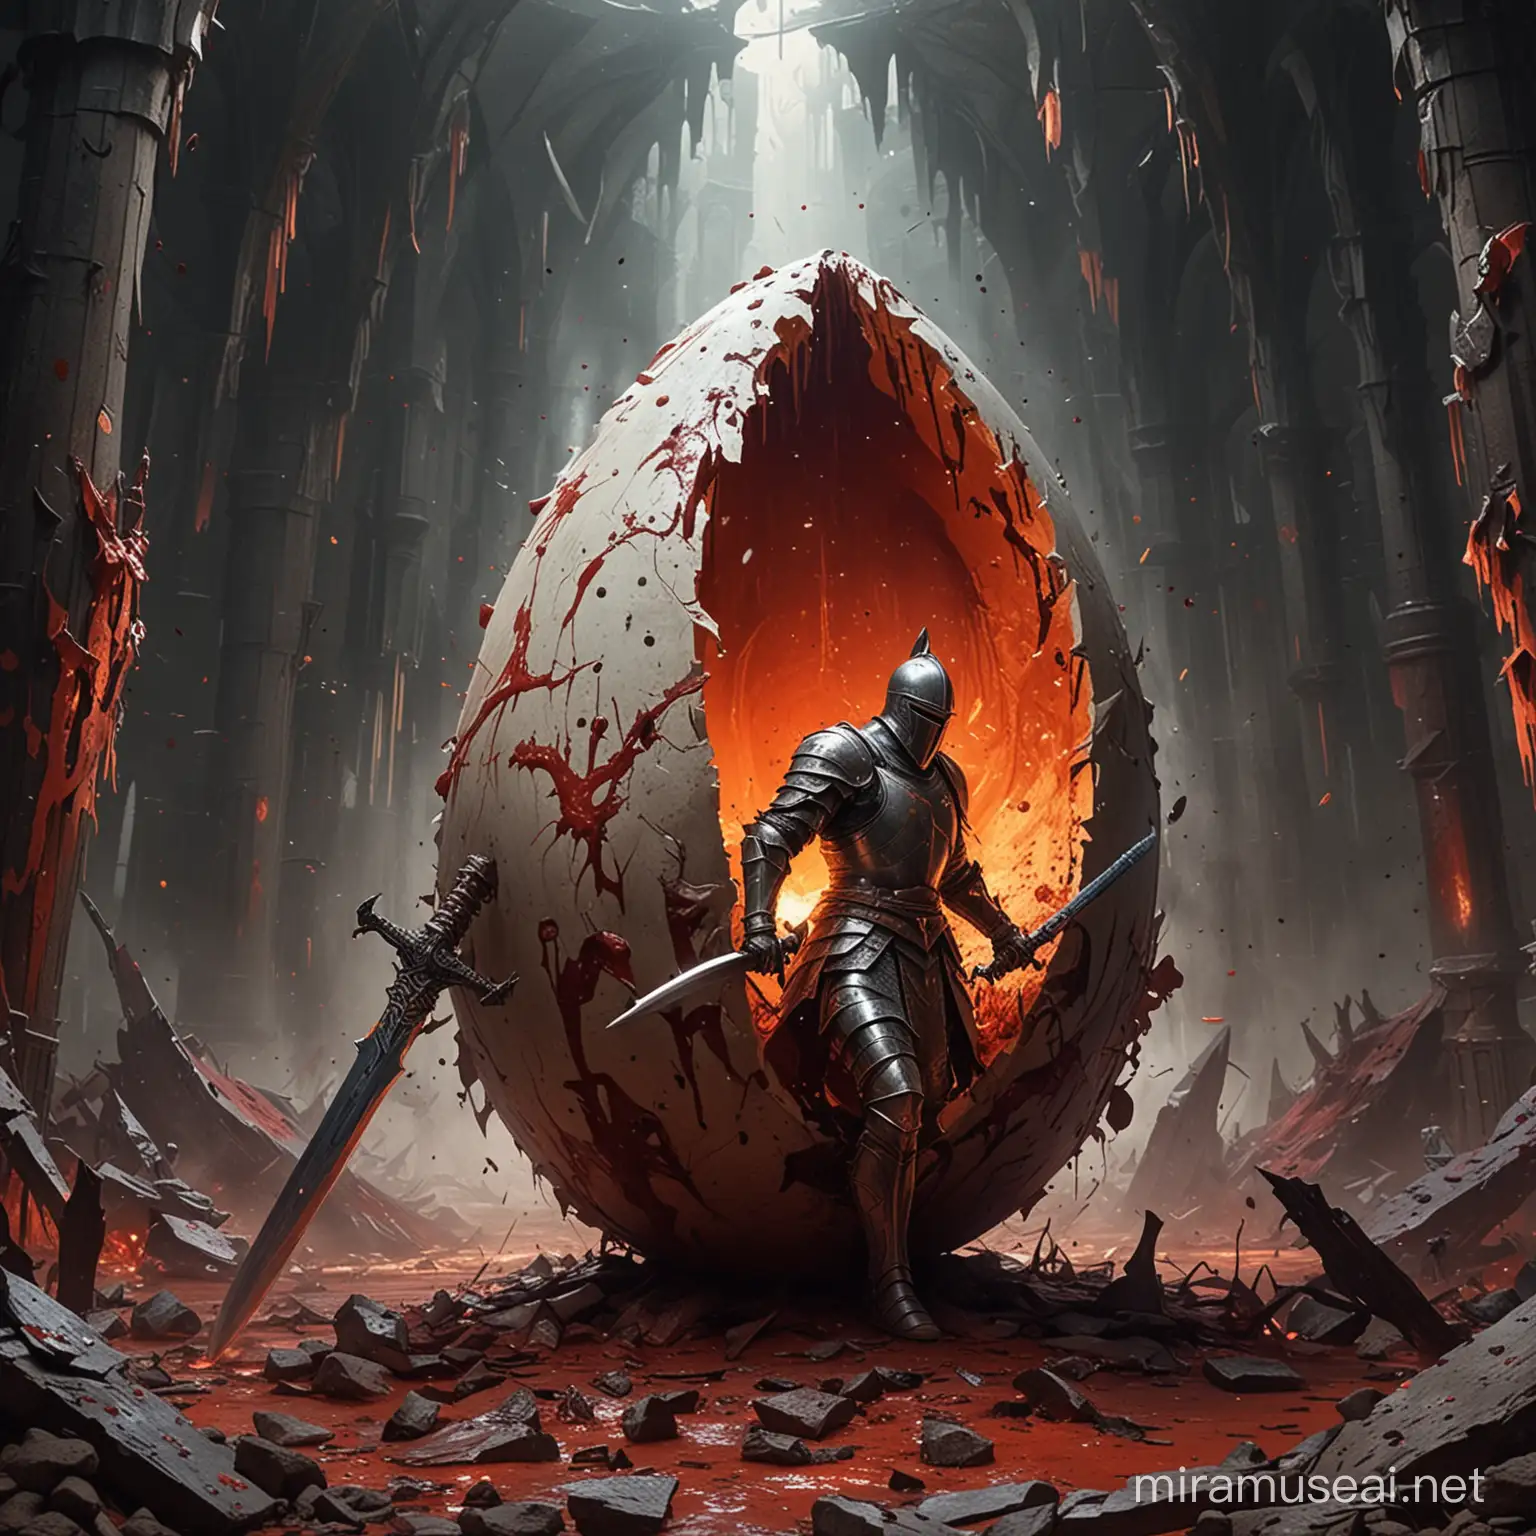 A knight slicing through a gigantic bloody egg with his sword